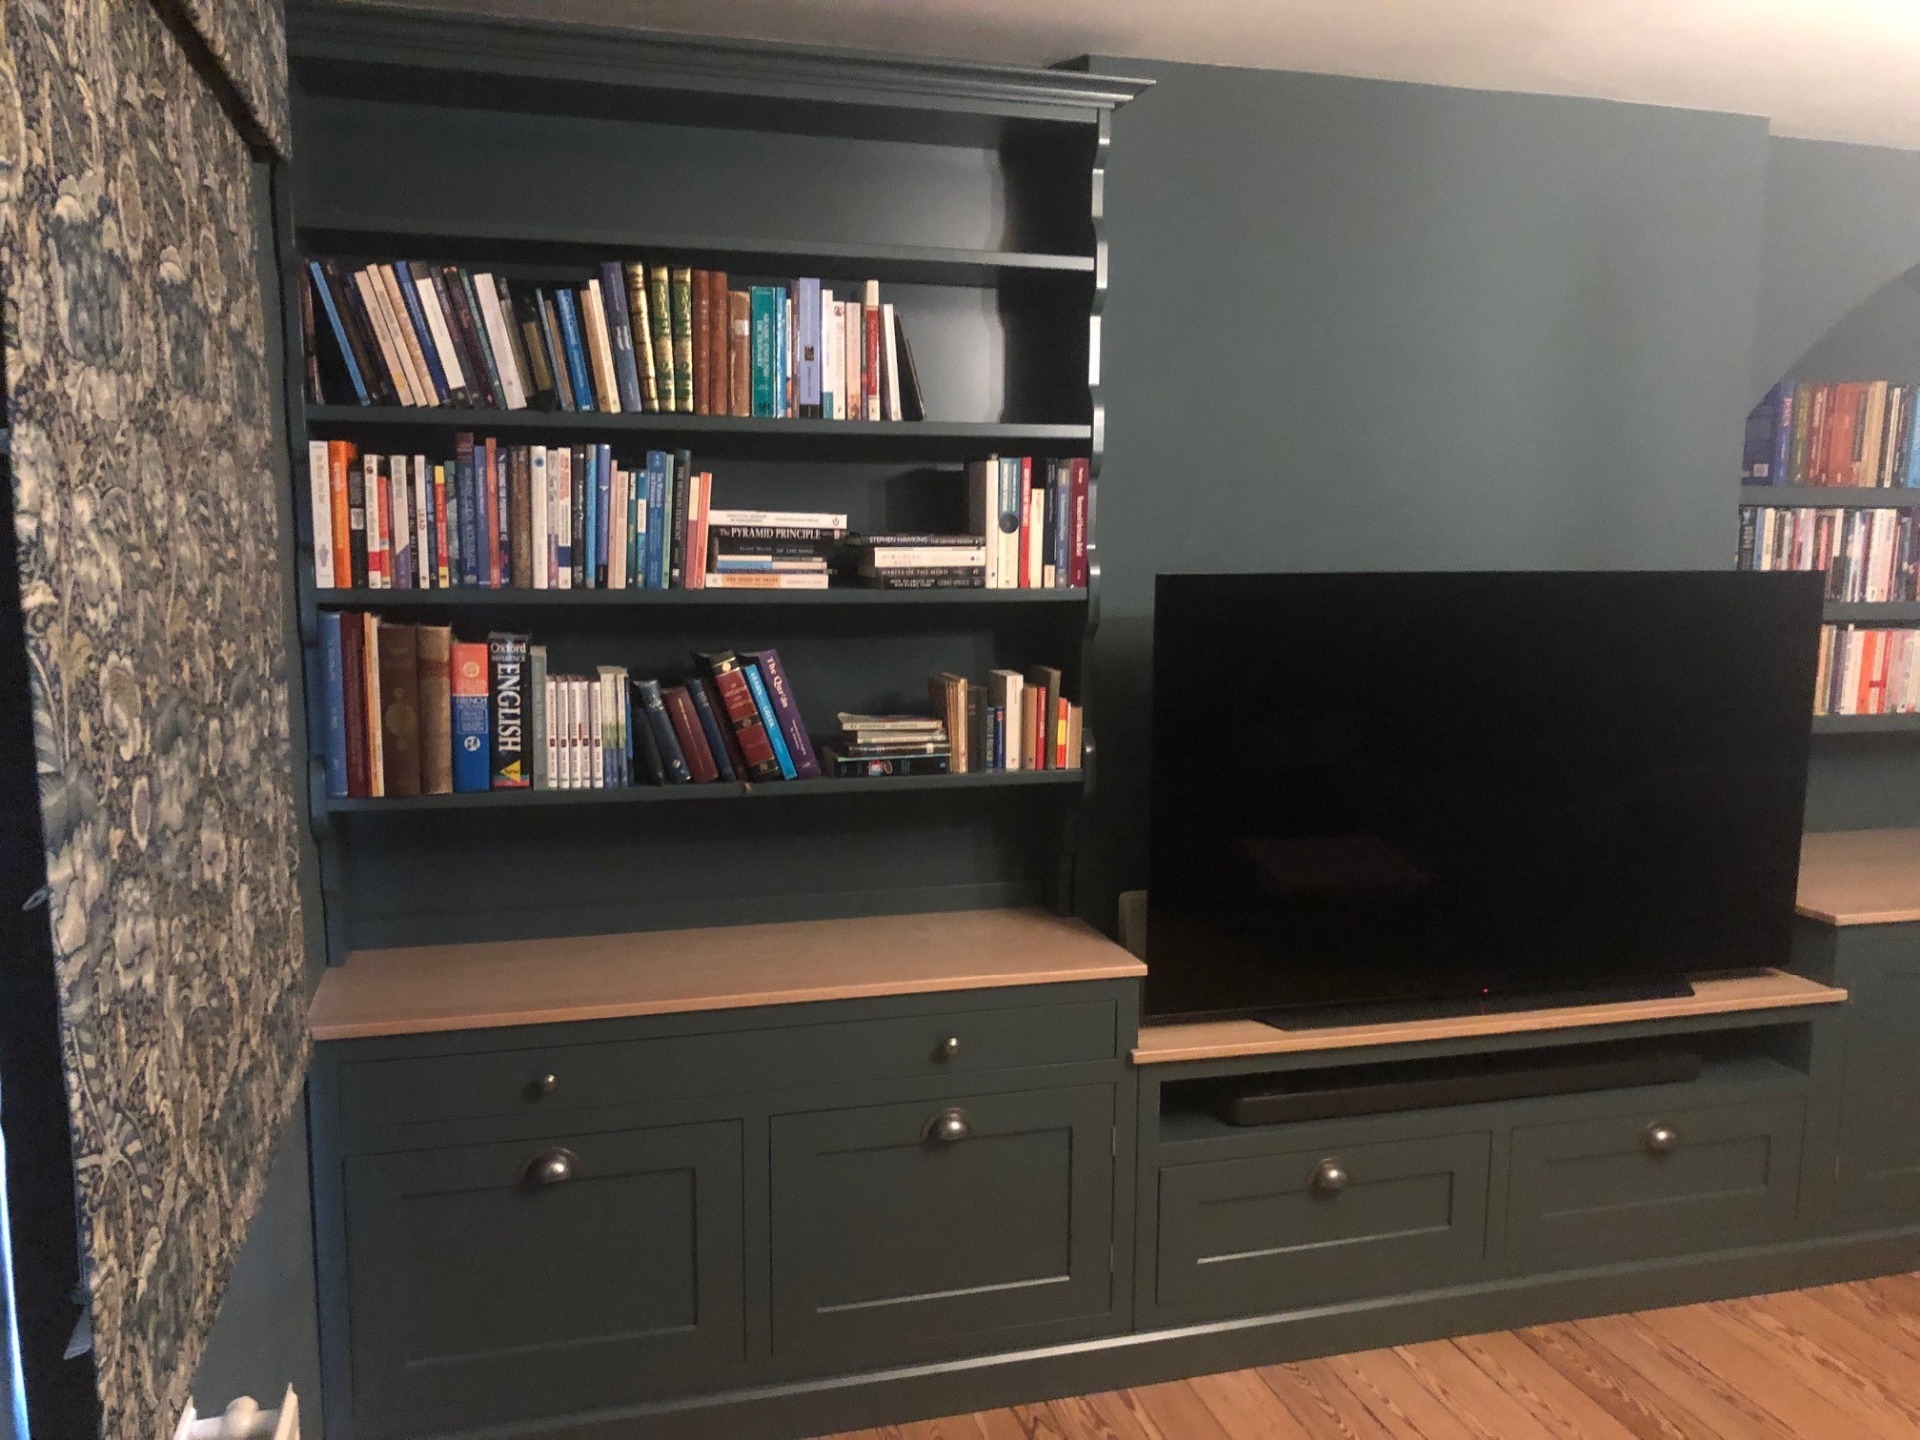 Alcove furniture installed in Oxford